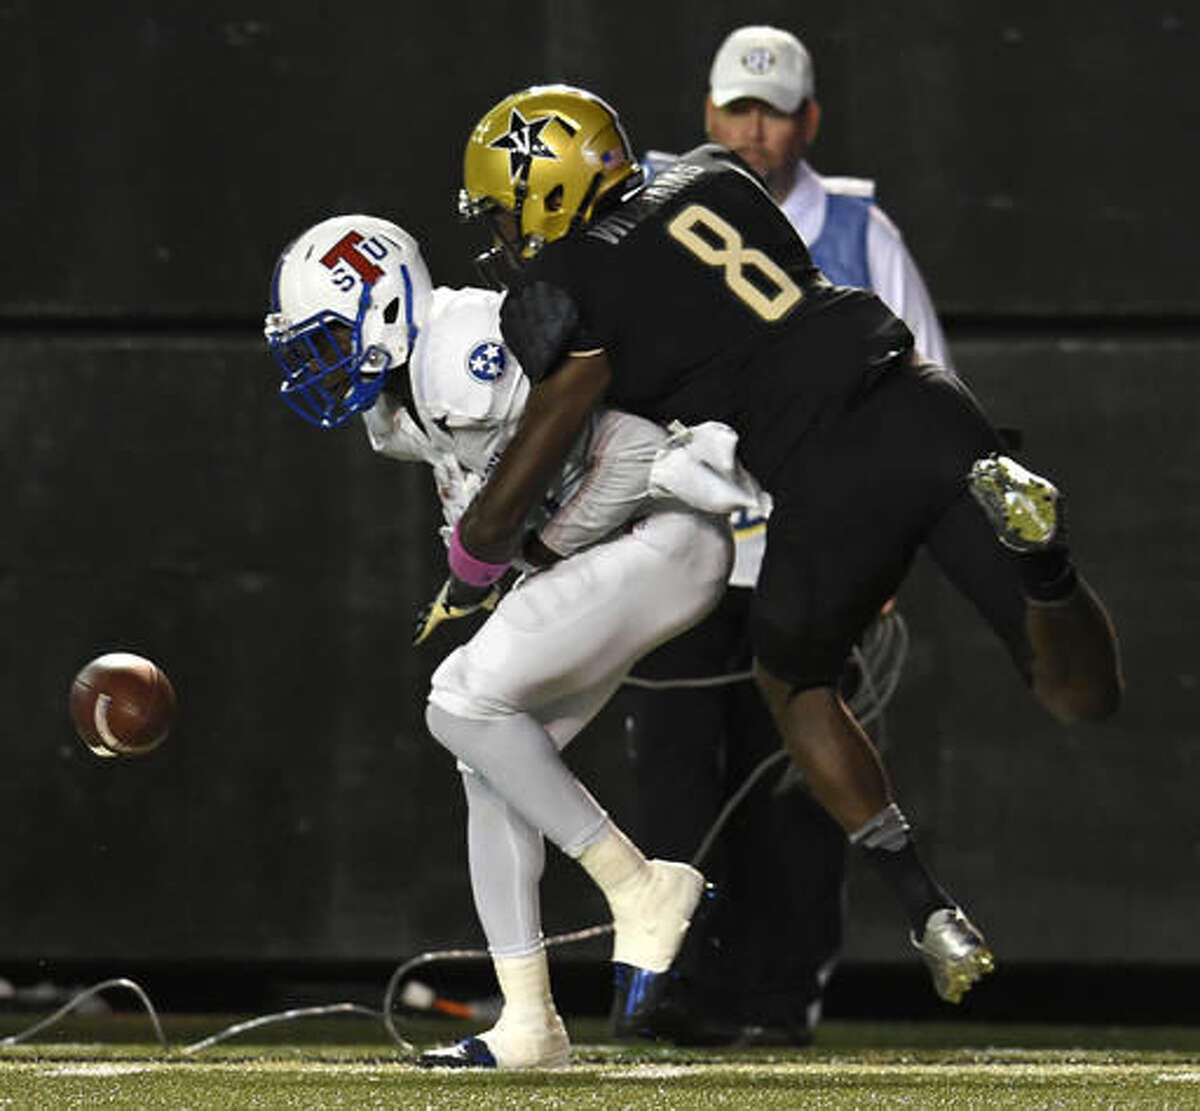 Vanderbilt defensive end Mack Weaver (8) breaks up a pass intended for Tennessee State wide receiver Steven Newbold (1) during the first half of an NCAA college football game Saturday, Oct. 22, 2016, in Nashville, Tenn. (George Walker IV/The Tennessean via AP)